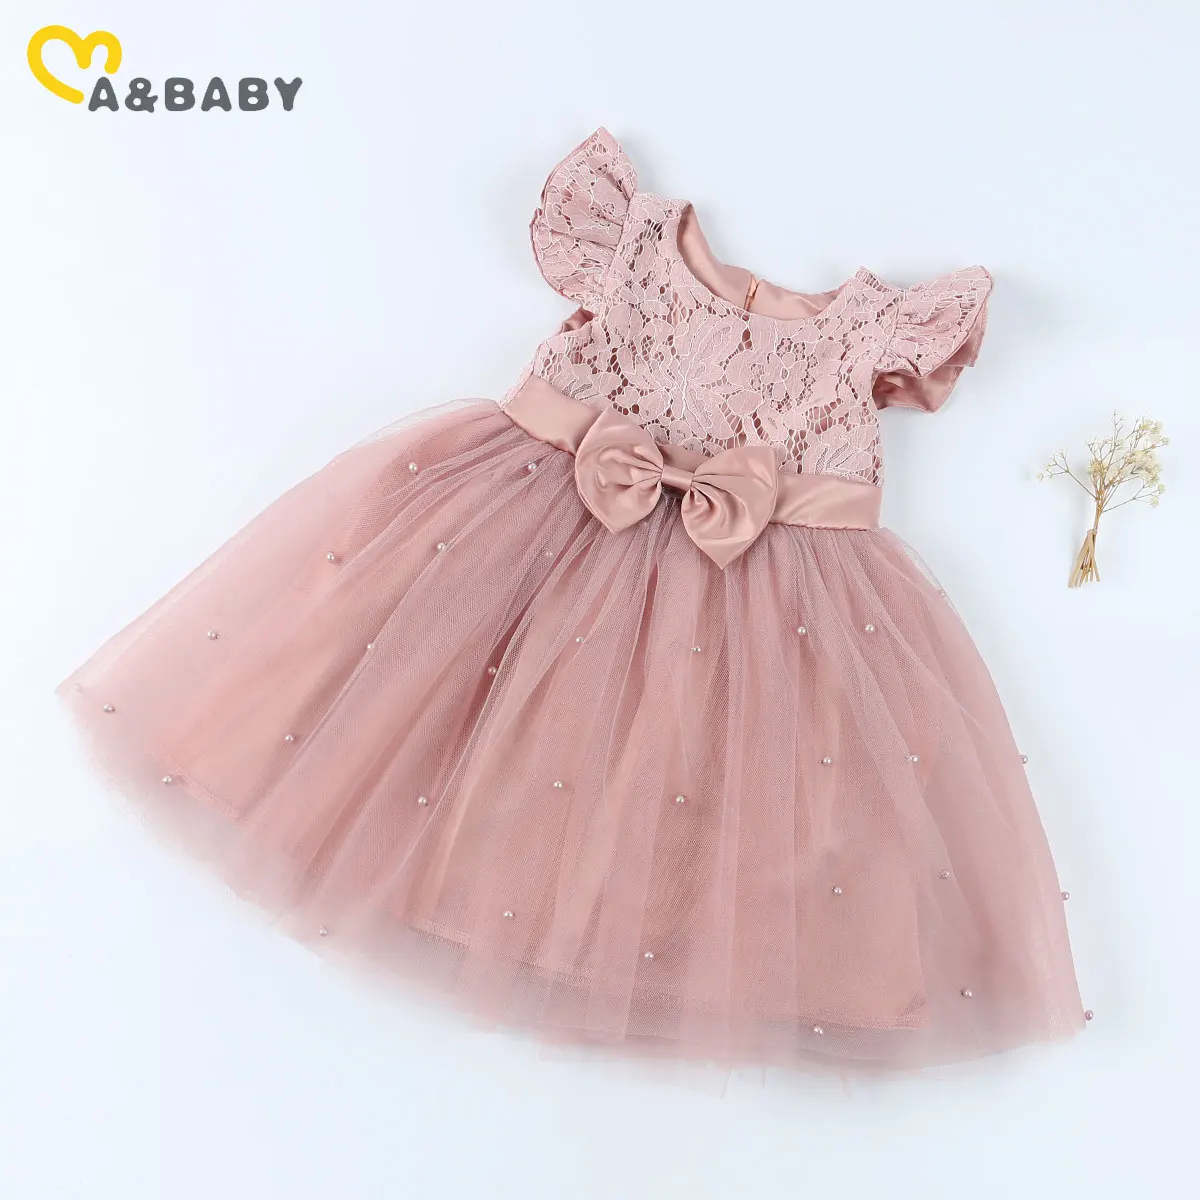 

ma&baby 2-7Years Toddler Infant Kid Girls Dress Lace Pearl Bow Tutu Dresses Birthday Party Wedding Costumes Clothing